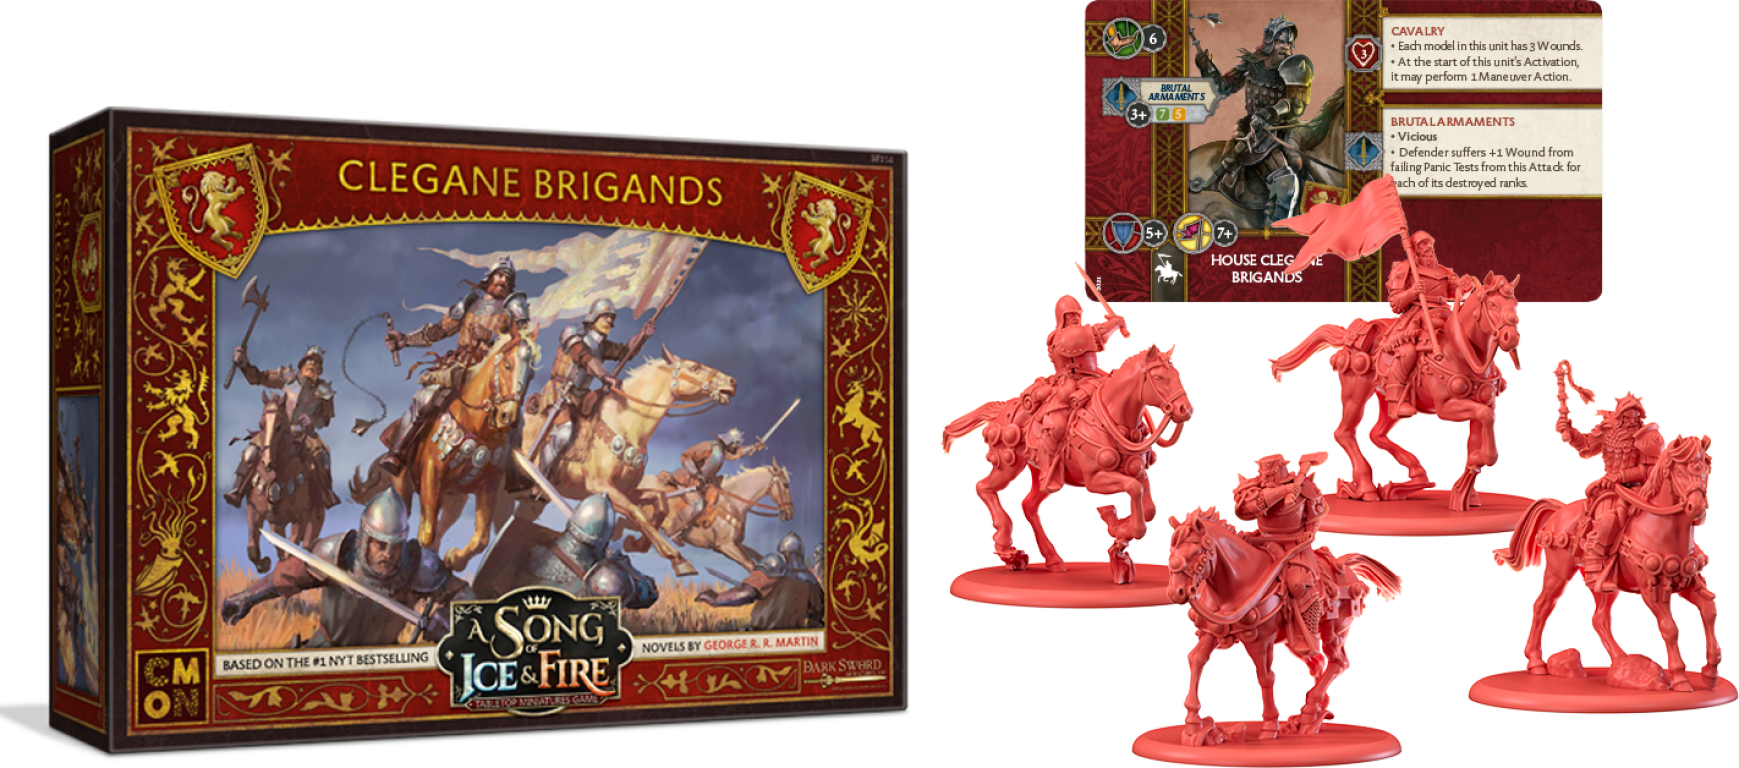 A Song of Ice & Fire: Tabletop Miniatures Game – Clegane Brigands components